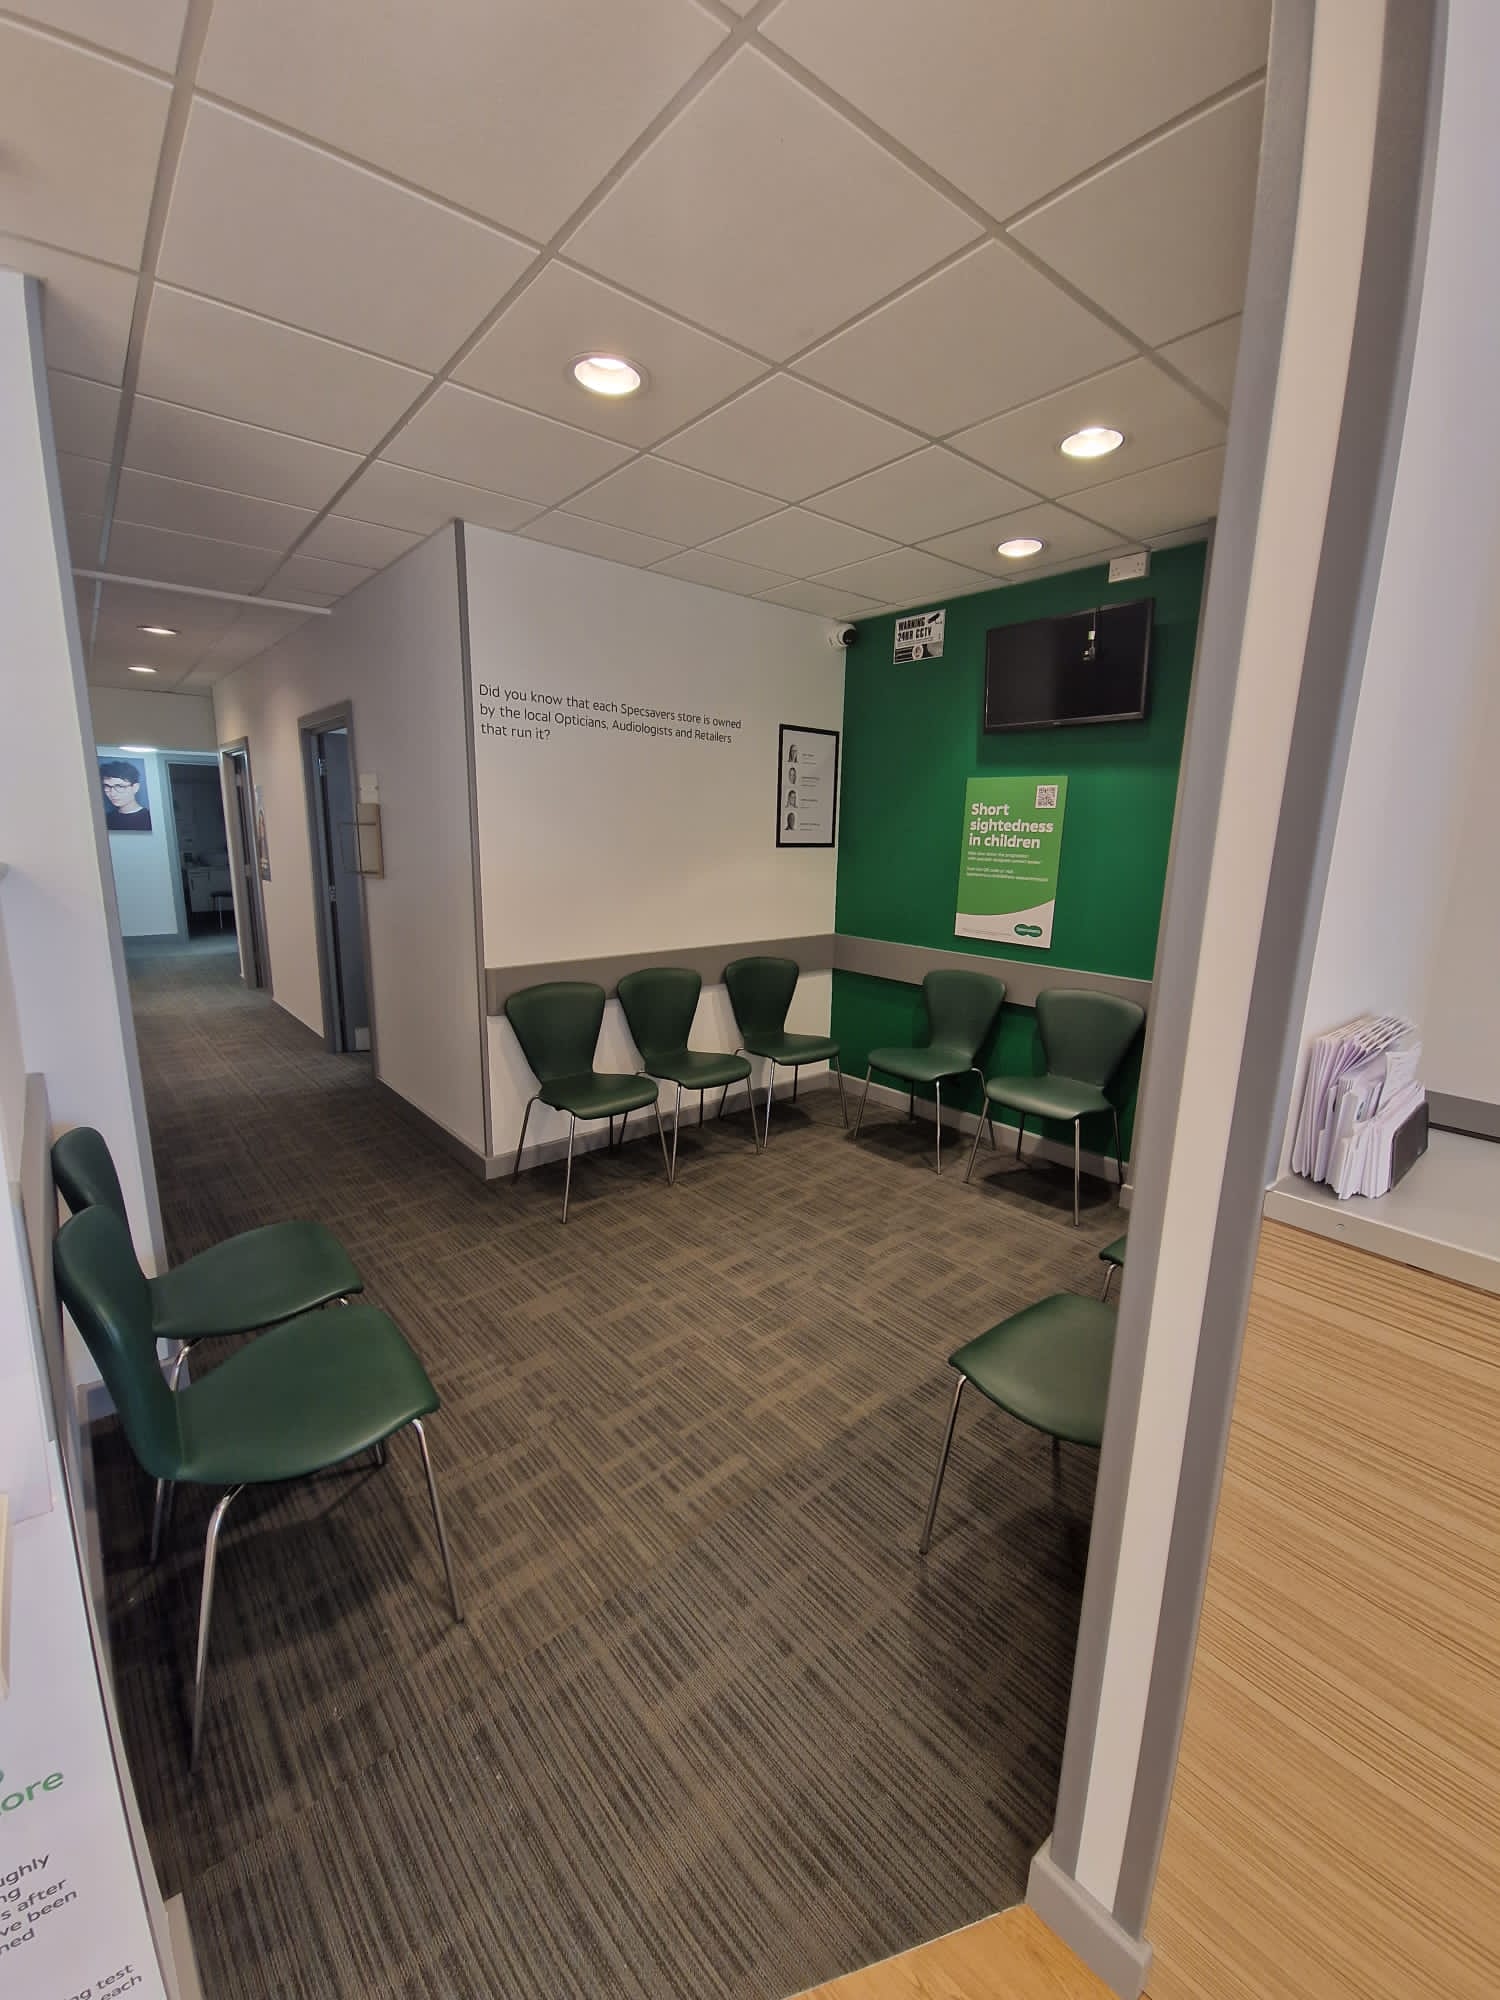 Images Specsavers Opticians and Audiologists - Chelmsford